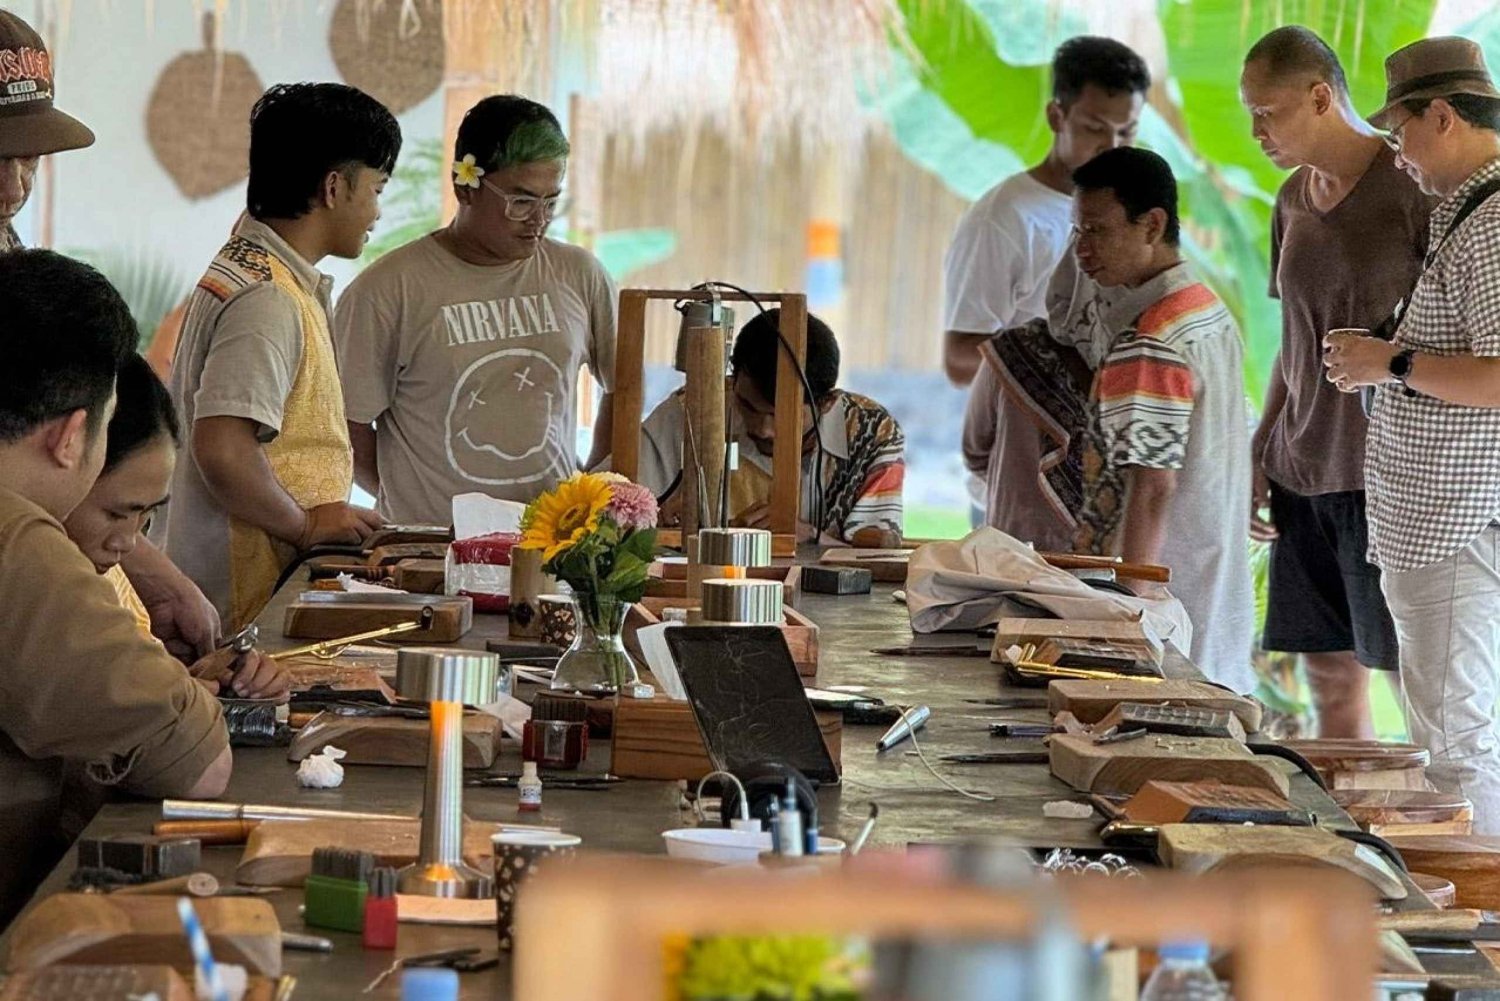 Ubud Silver Class: Make Your Own Silver Jewellery Class